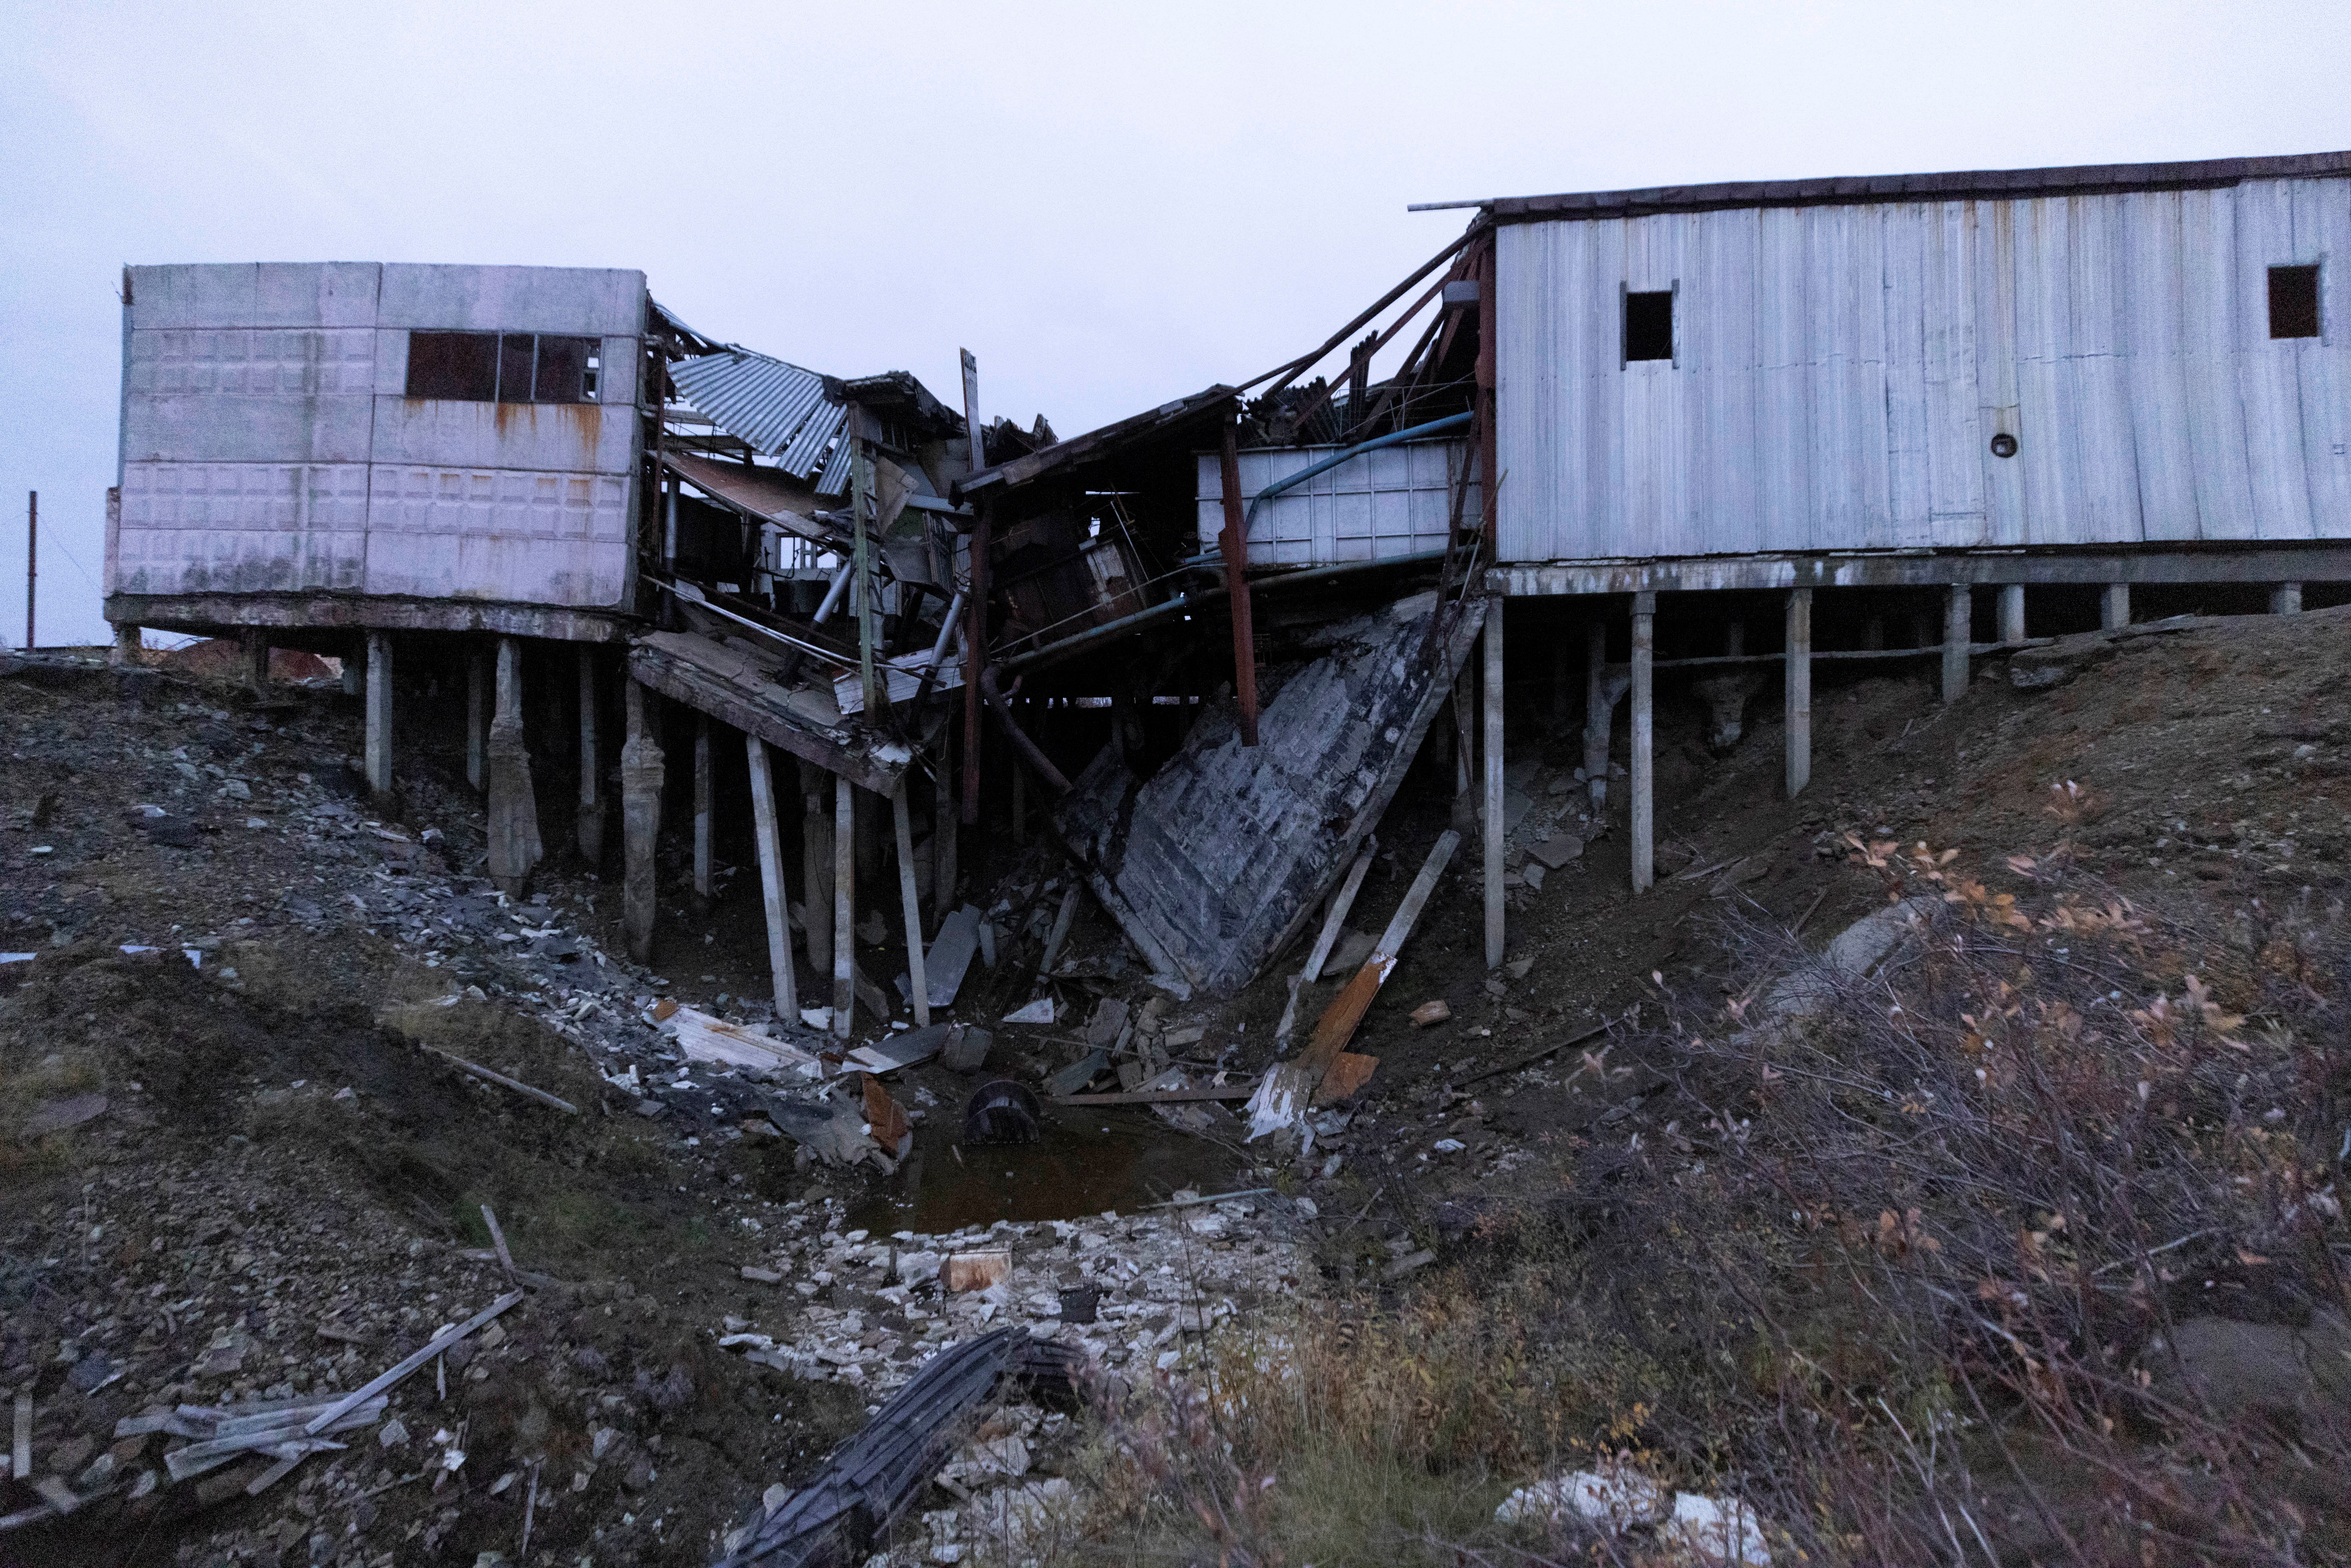 An industrial building that was destroyed when the permafrost thawed under its foundation is seen in the town of Chersky, Sakha (Yakutia) Republic, Russia, September 13, 2021. REUTERS/Maxim Shemetov